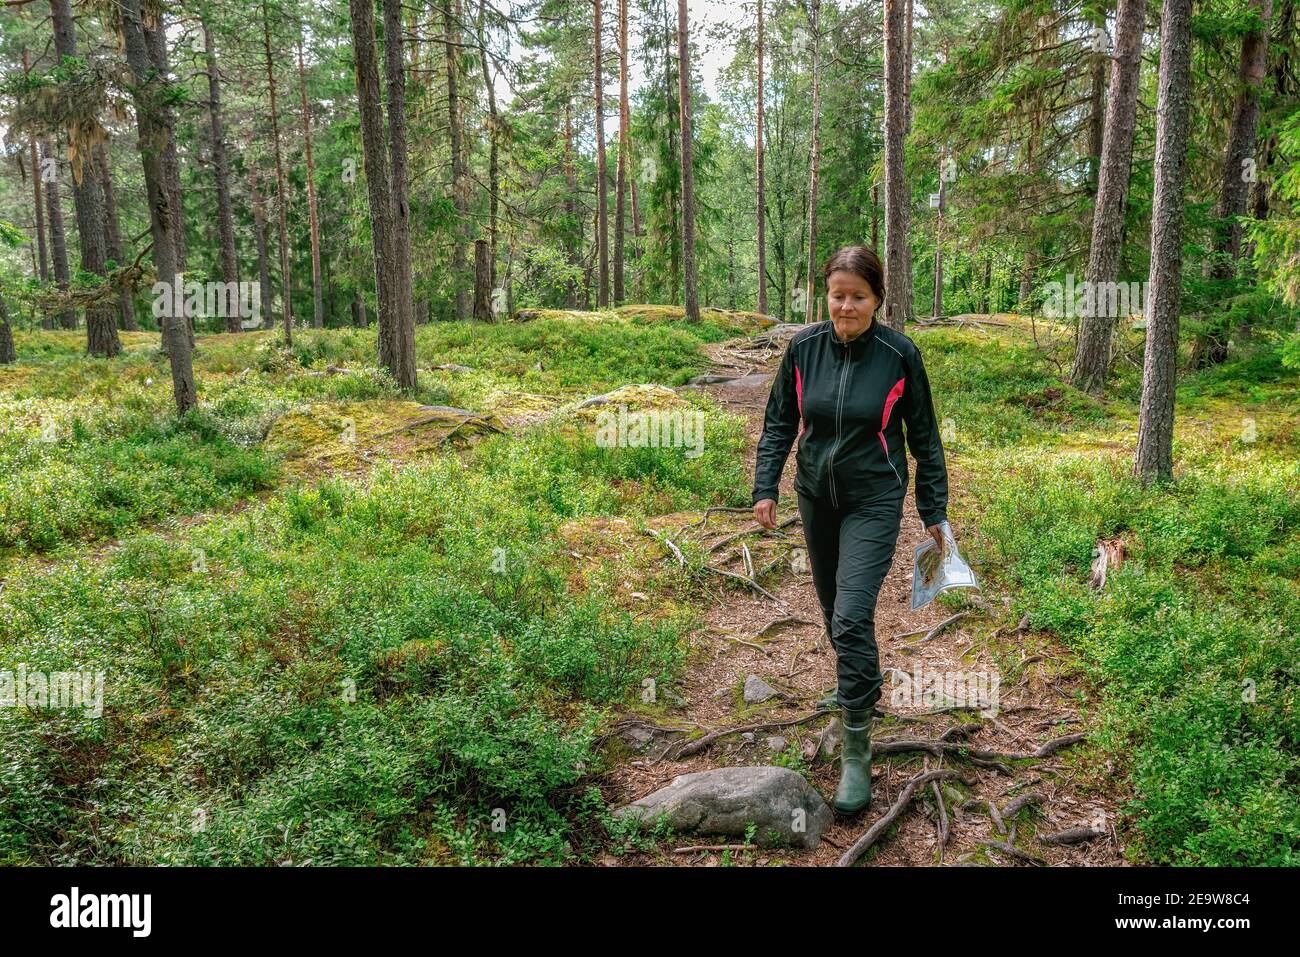 Cute middle aged Caucasian women wearing black sportswear walking with map in pine tree forest during exercise in outdoor orienteering, Sweden, hobby Stock Photo